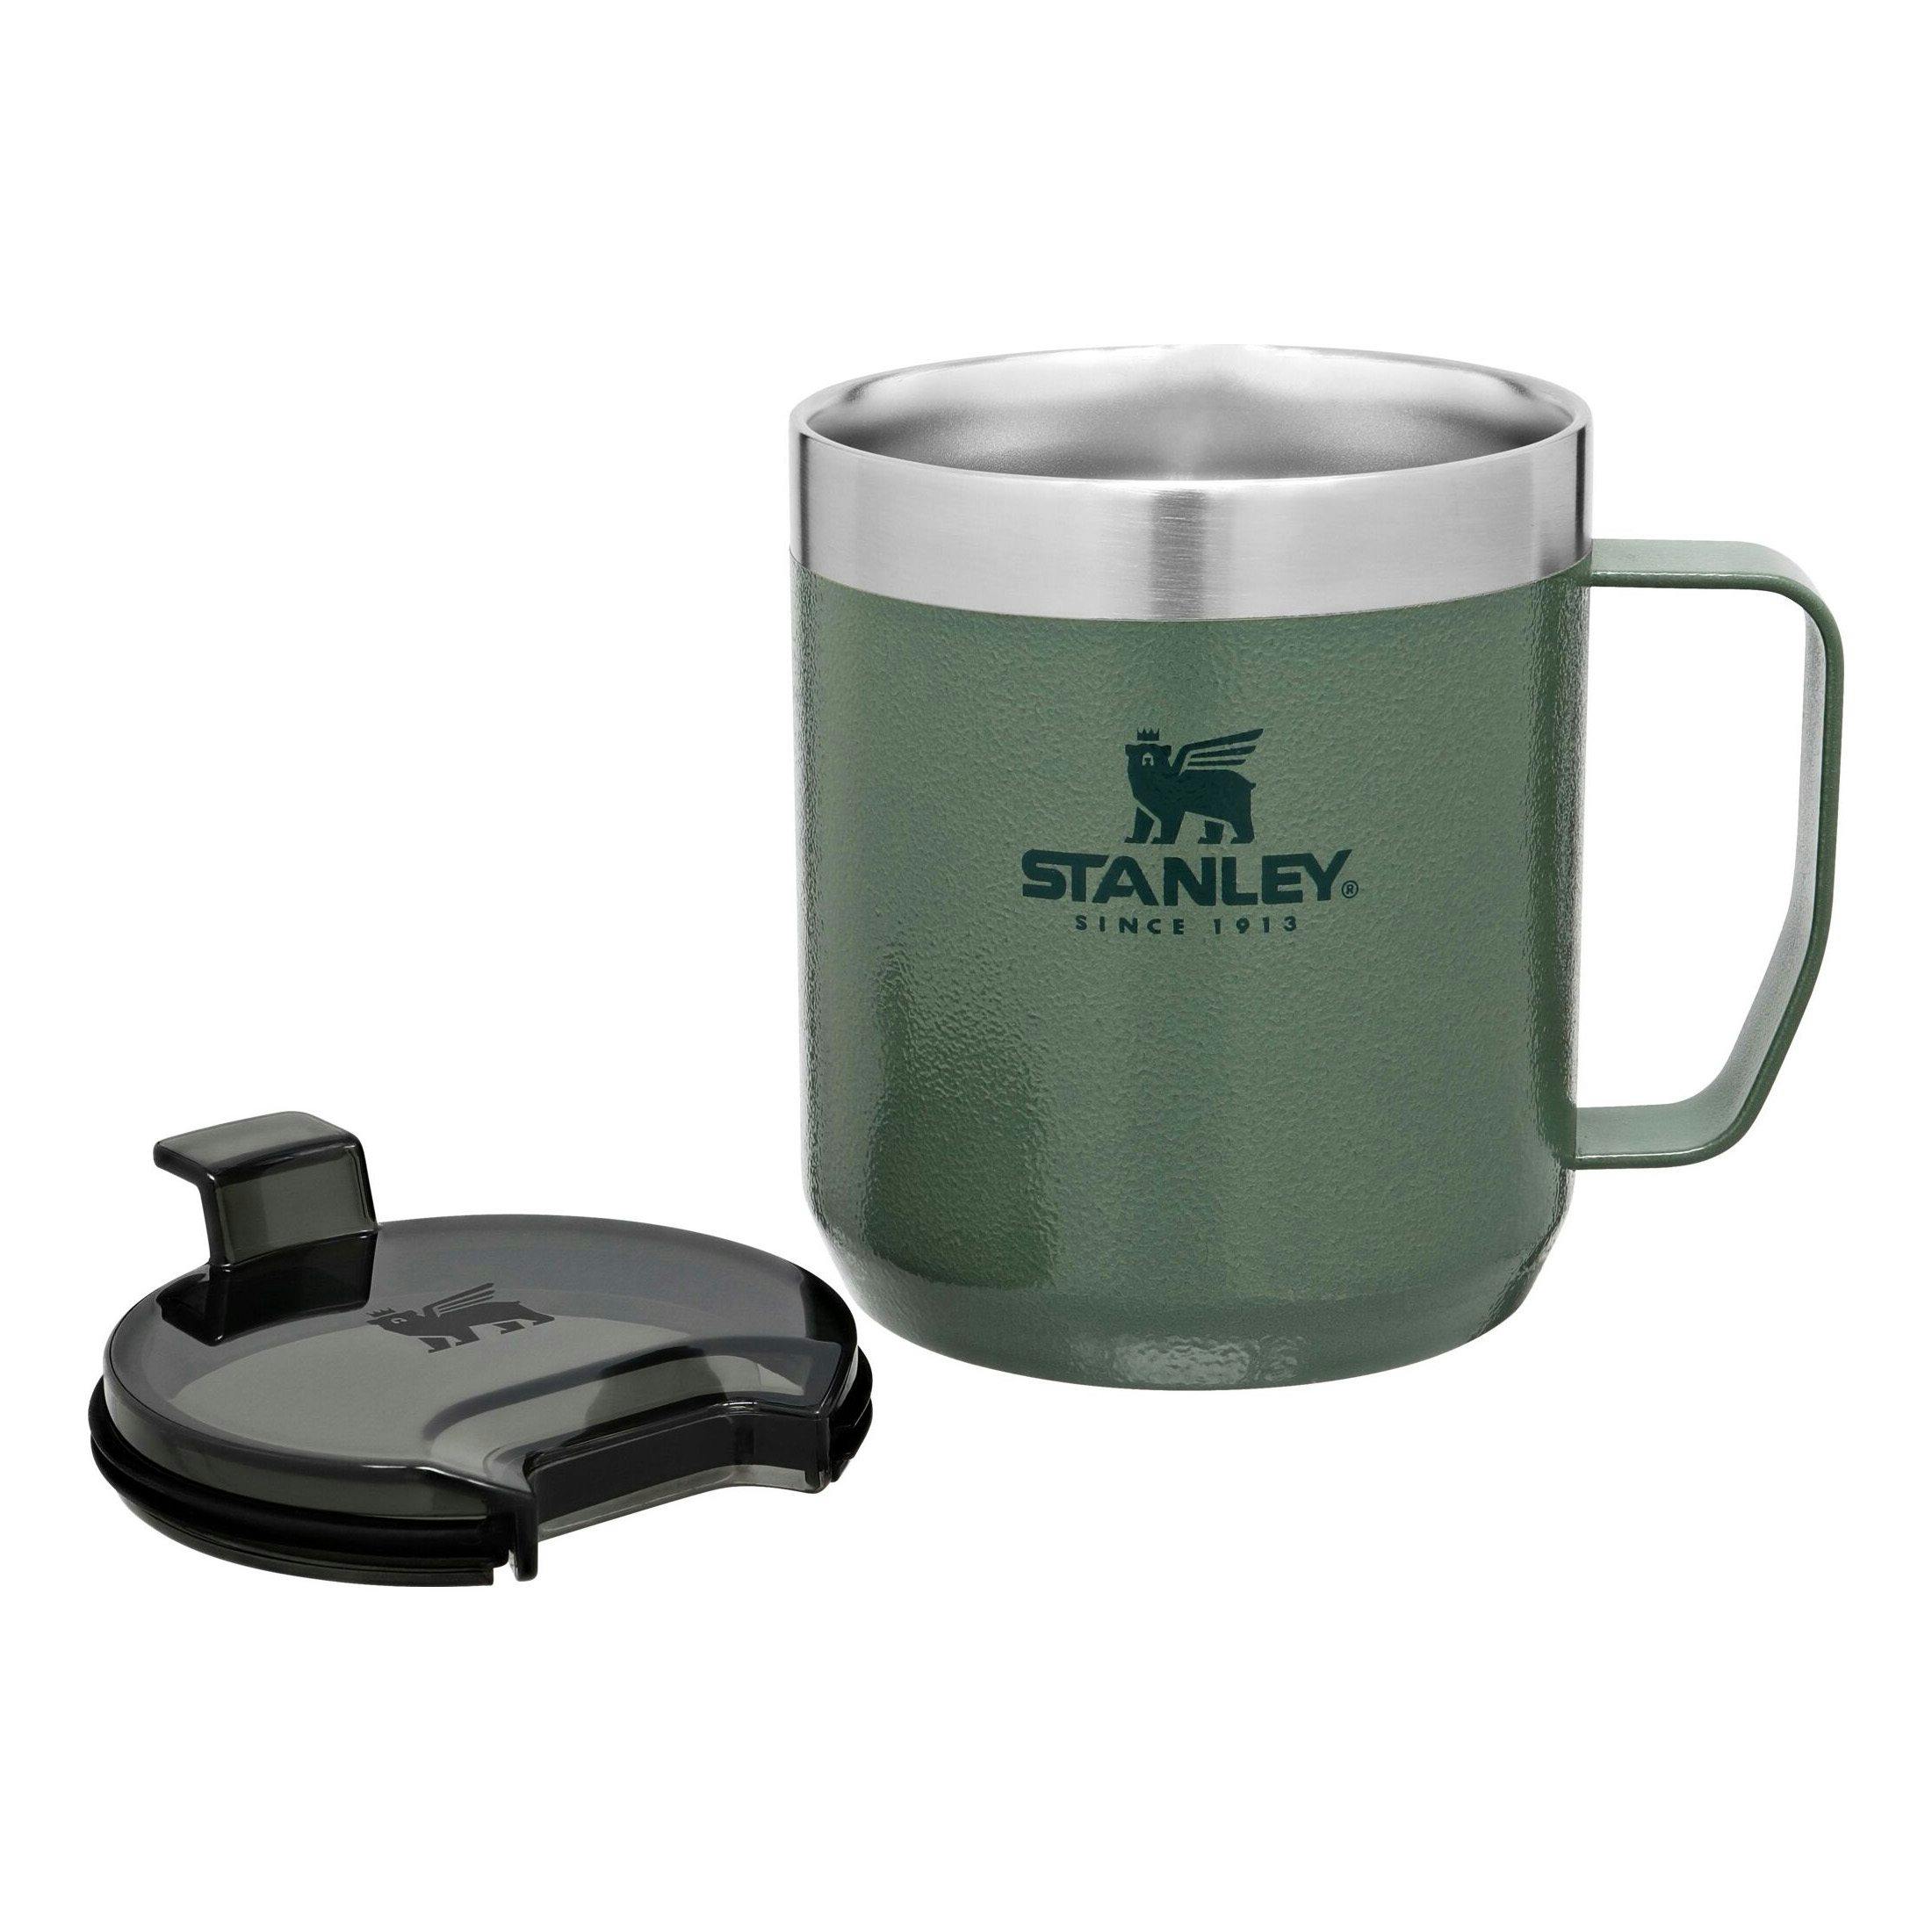 Stanley camping gear is on sale at